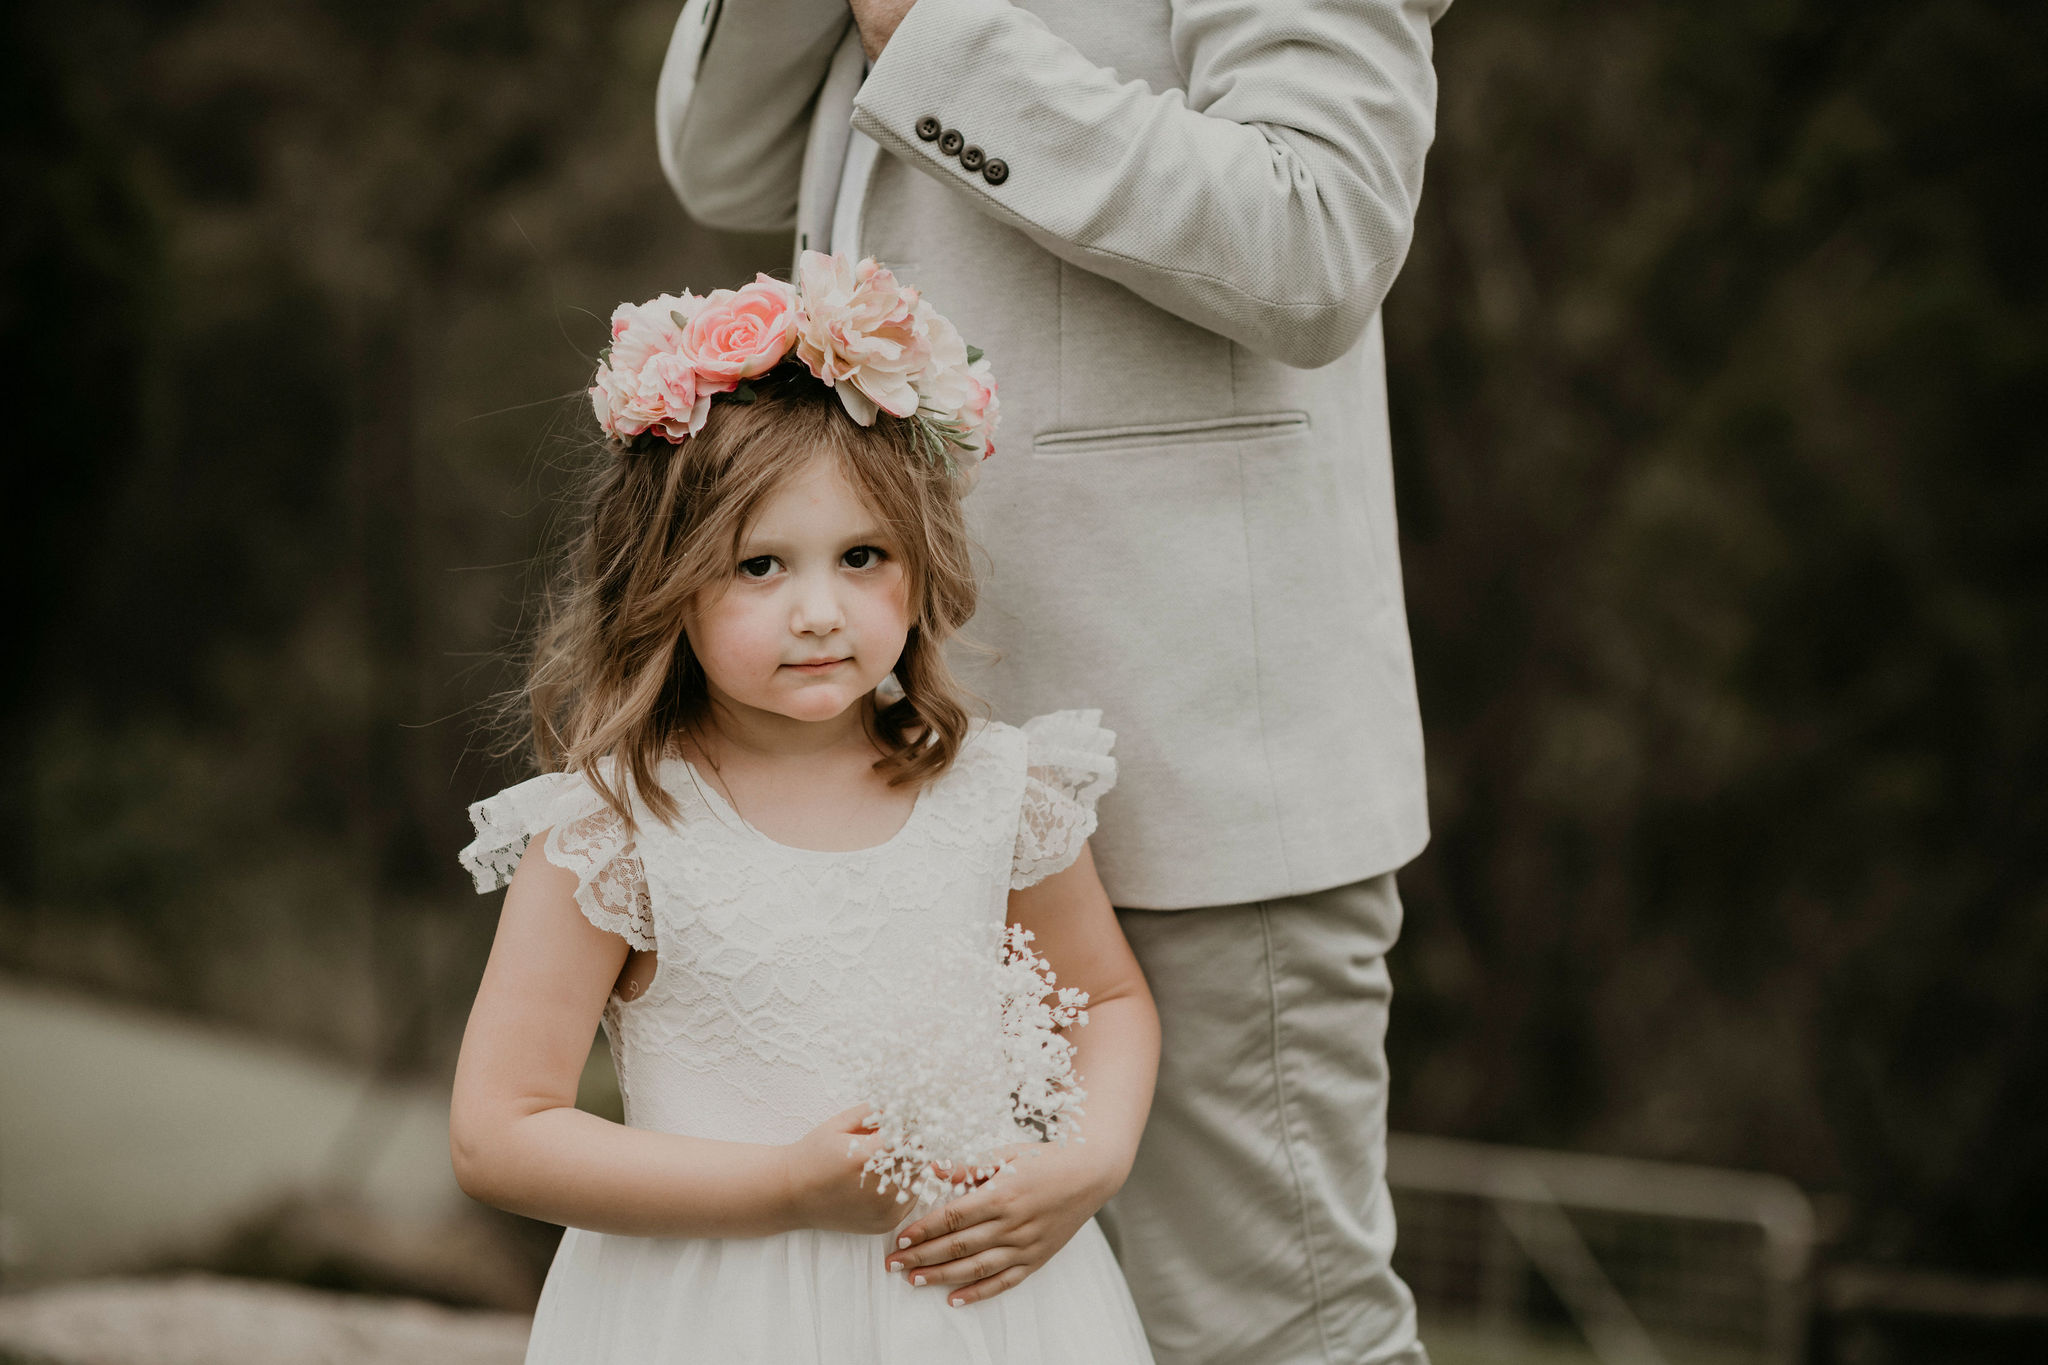 Lets-Elope-Melbourne-Celebrant-Photographer-Elopement-Package-Victoria-Sarah-Matler-Photography-Orchard-with-Kids-Farm-Vigano-weddings-intimate-16